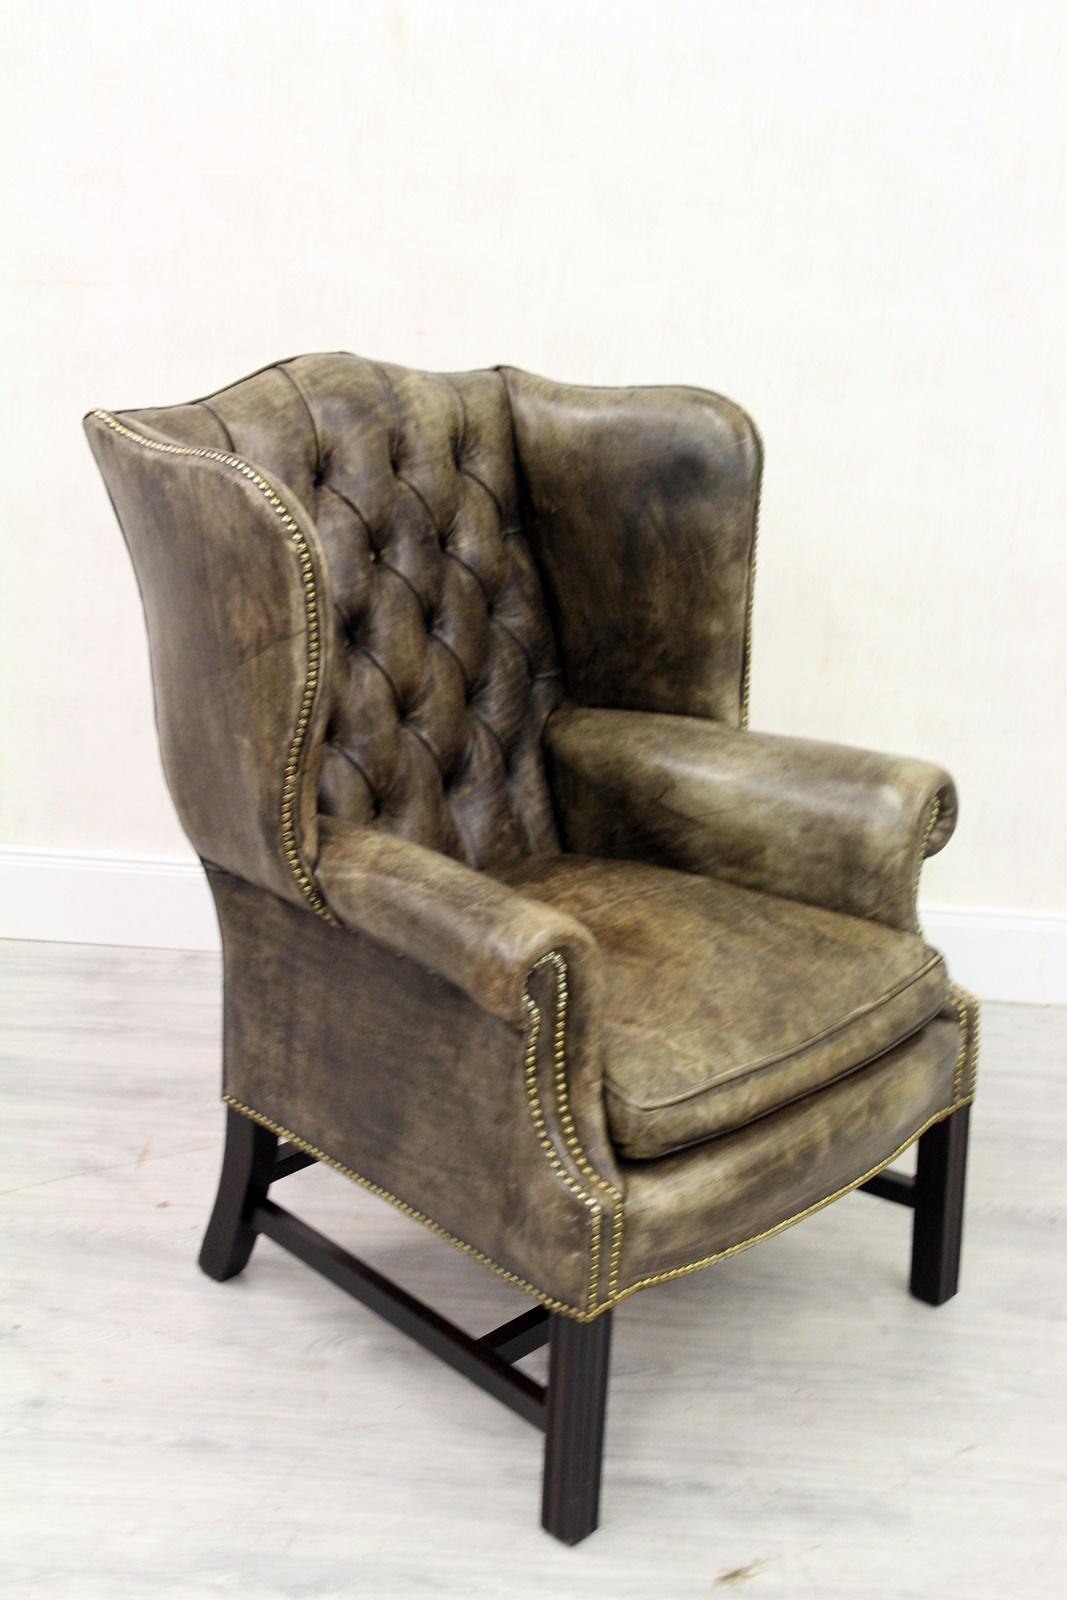 2 Chesterfield Armchair Wing Chair Antique Chair im Angebot 3